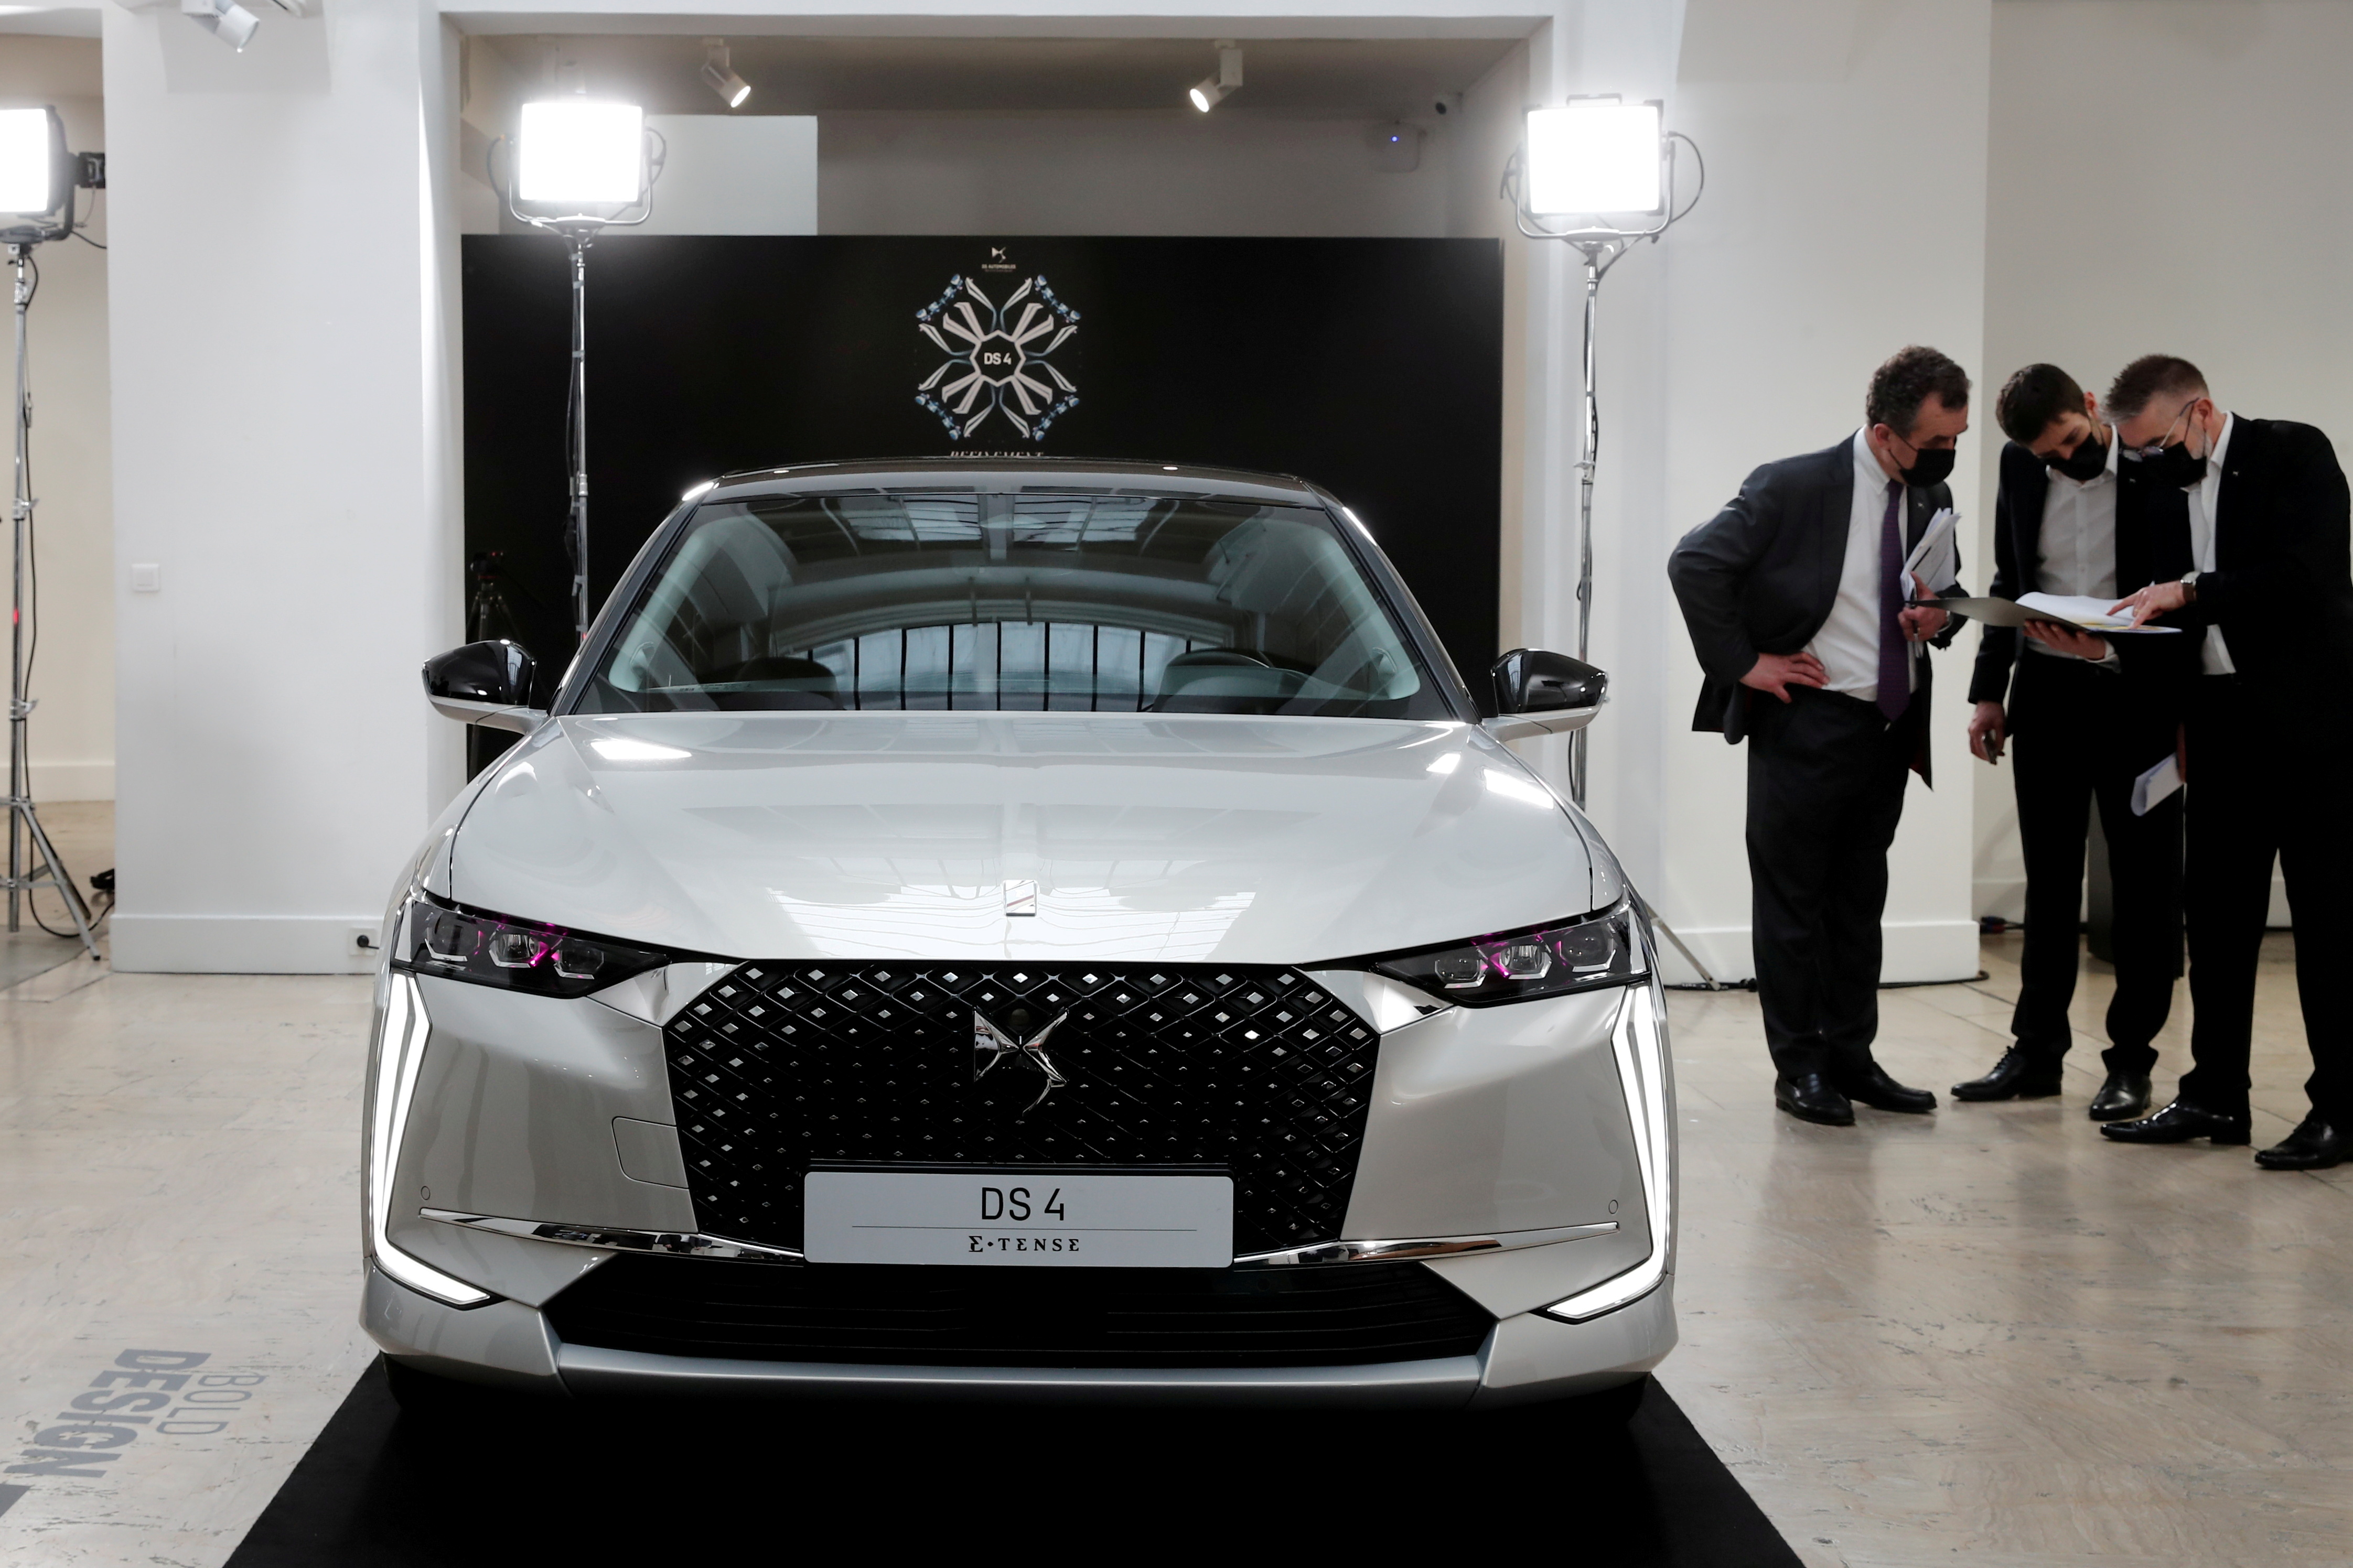 A DS 4 automobile, produced by Stellantis, stands on display during its launch event in Paris